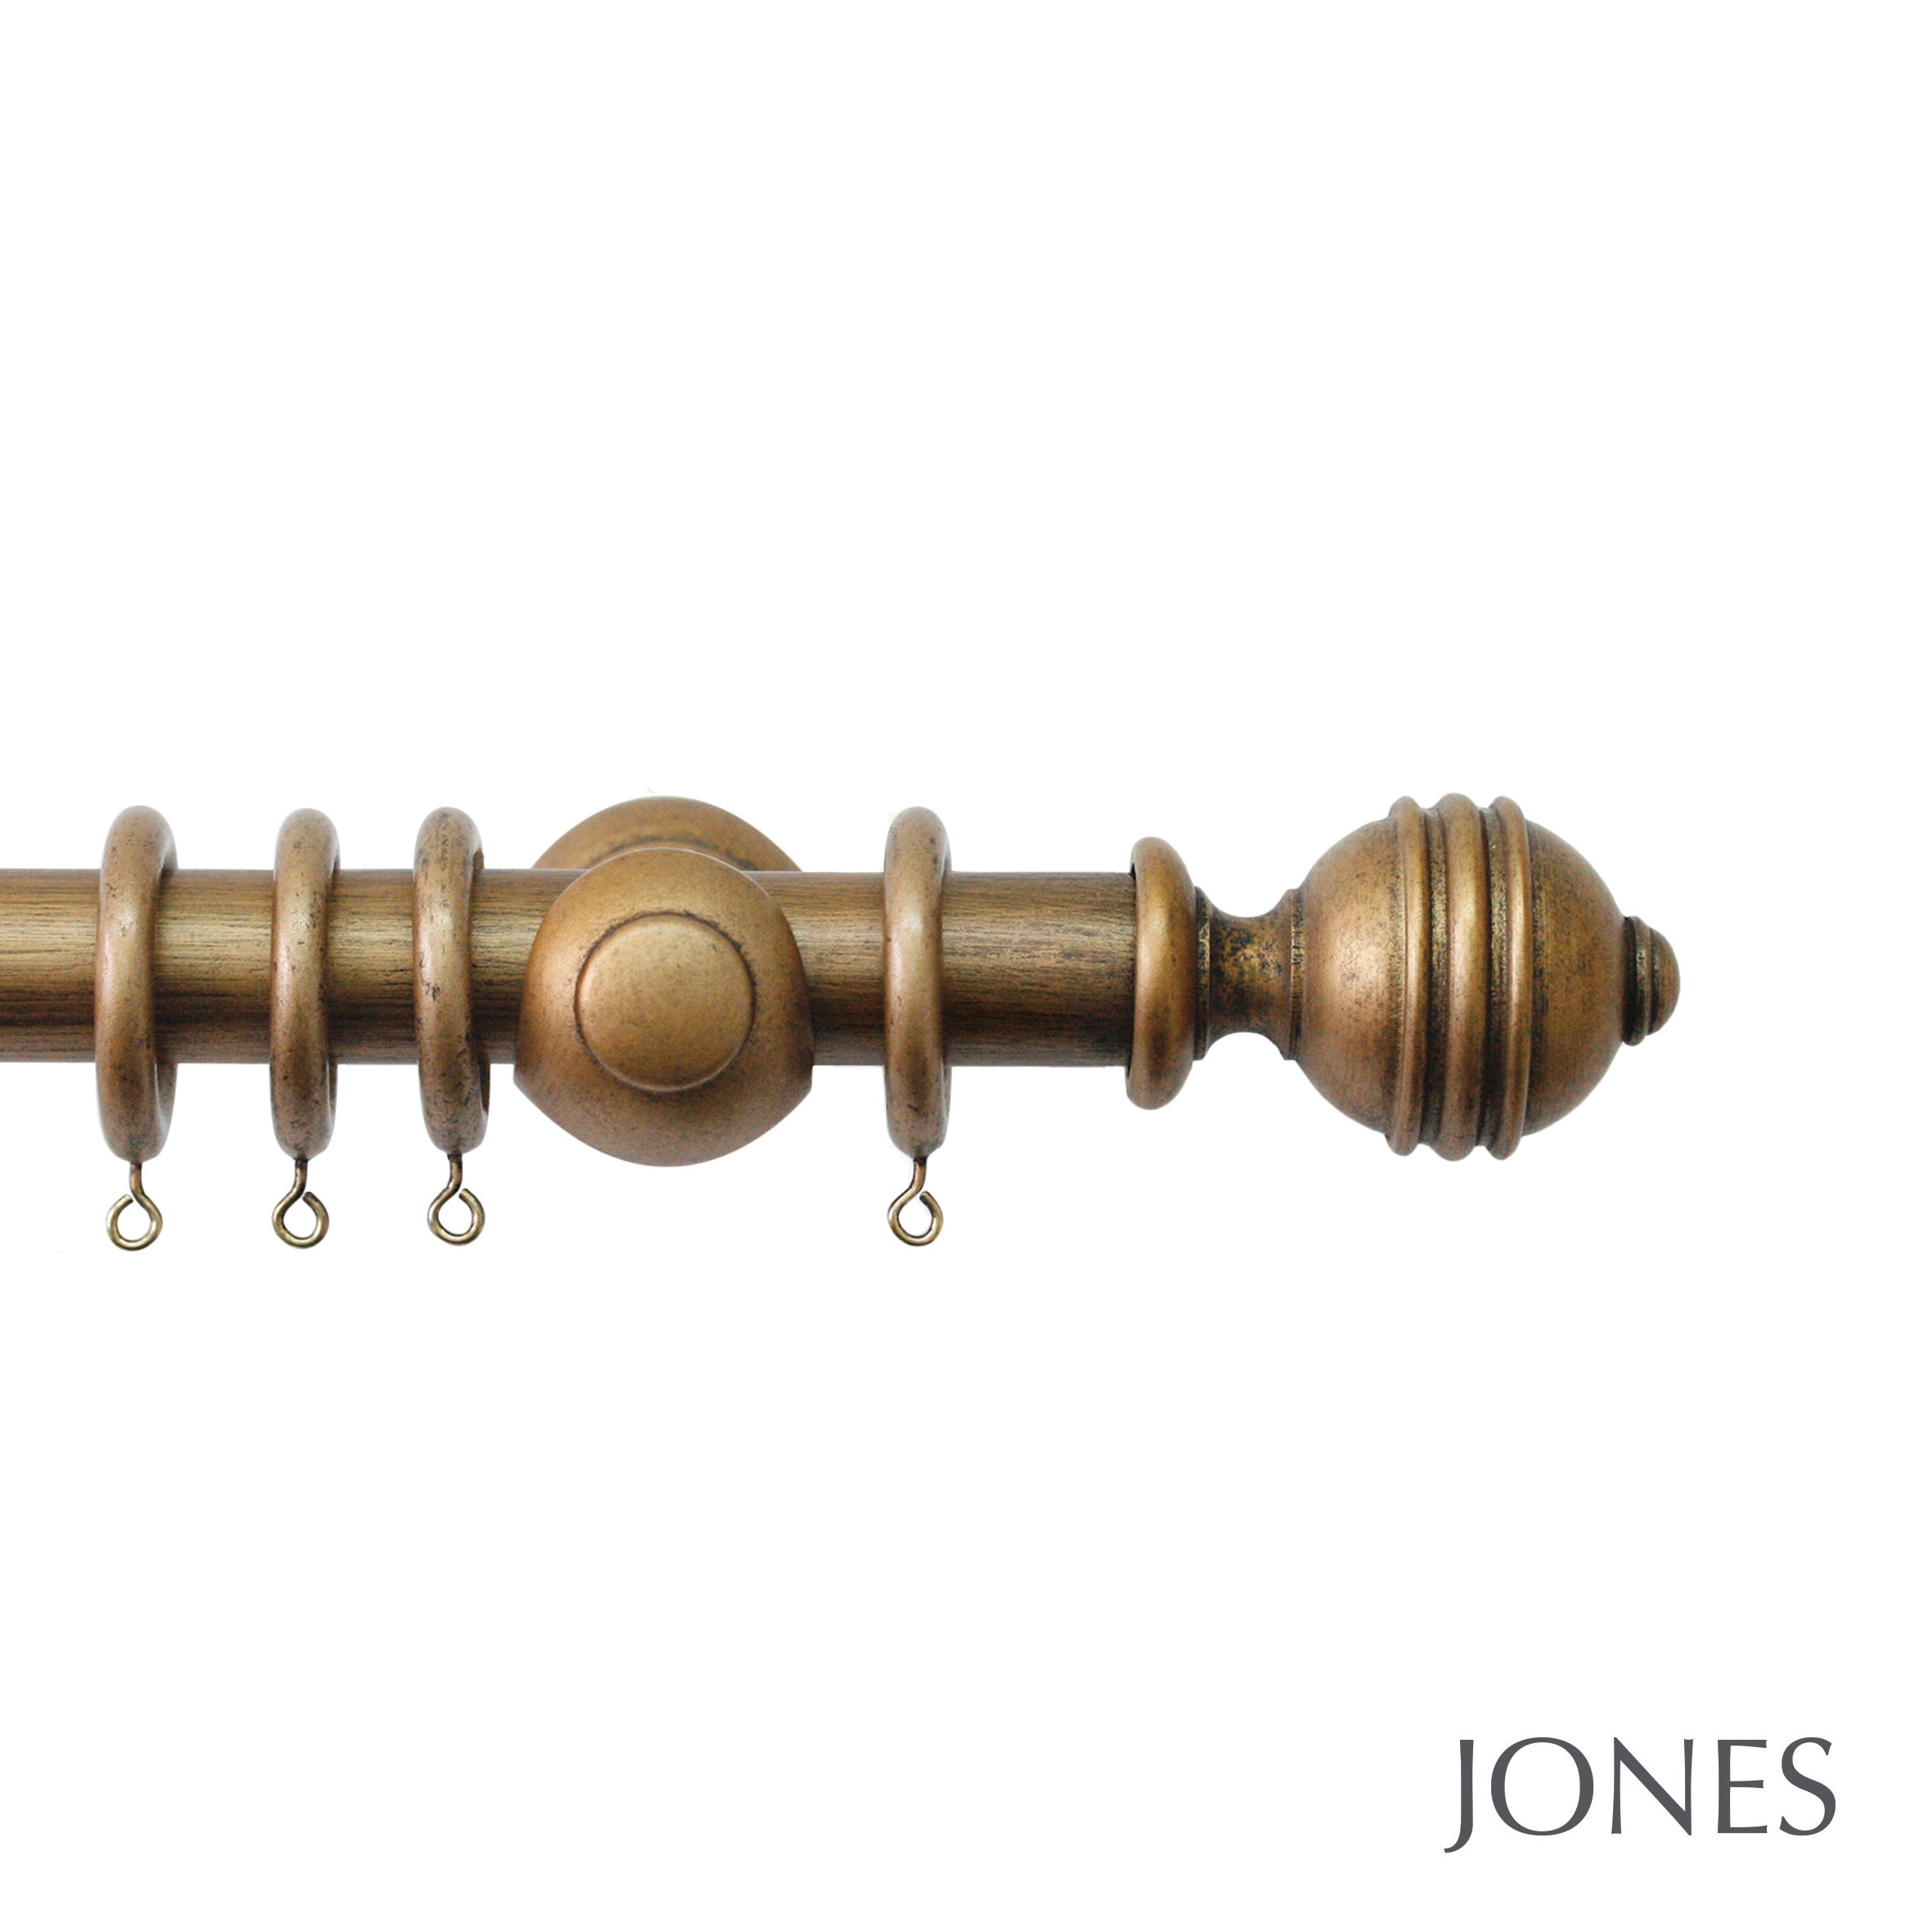 Jones Interiors Cathedral Ely Finial Curtain Pole Set in Antique Gold